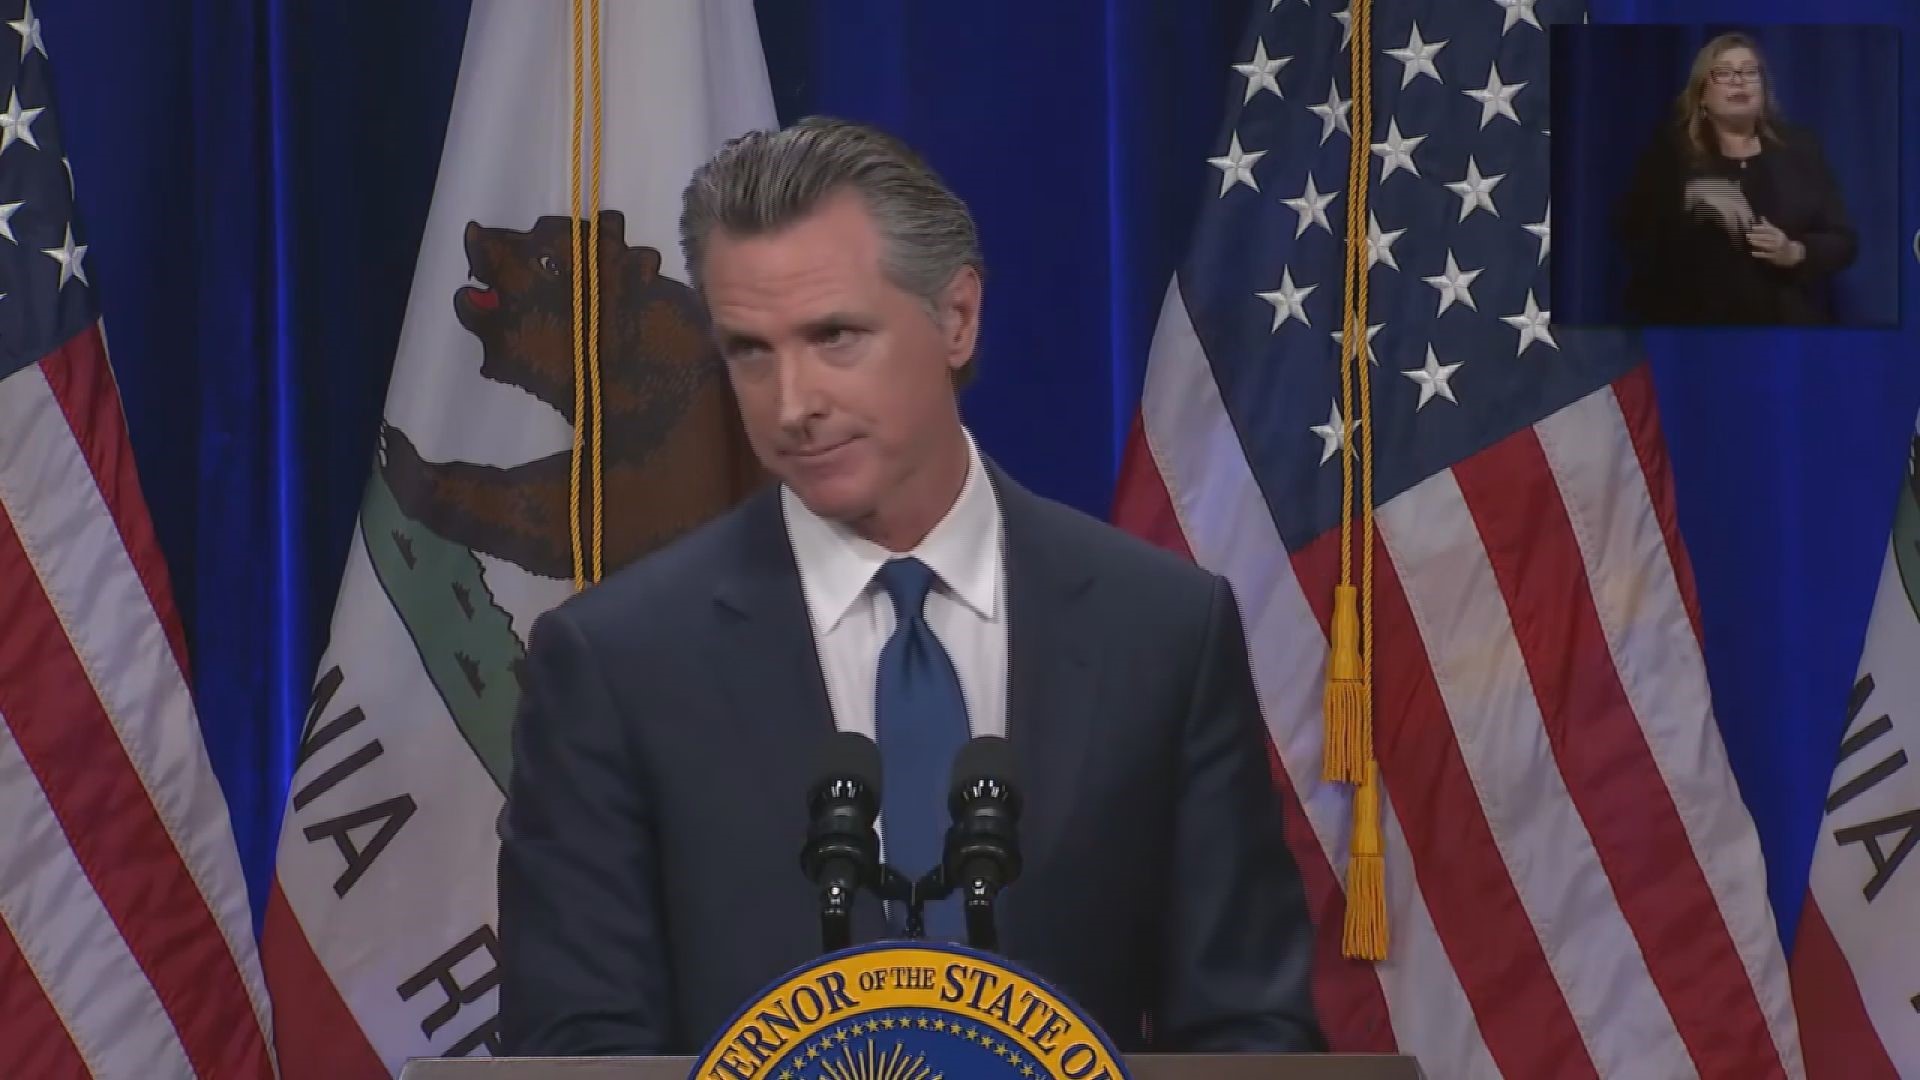 Gov. Newsom struck an optimistic tone about California's COVID-19 outlook at Tuesday's State of the State Address, and a NorCal epidemiologist agrees.